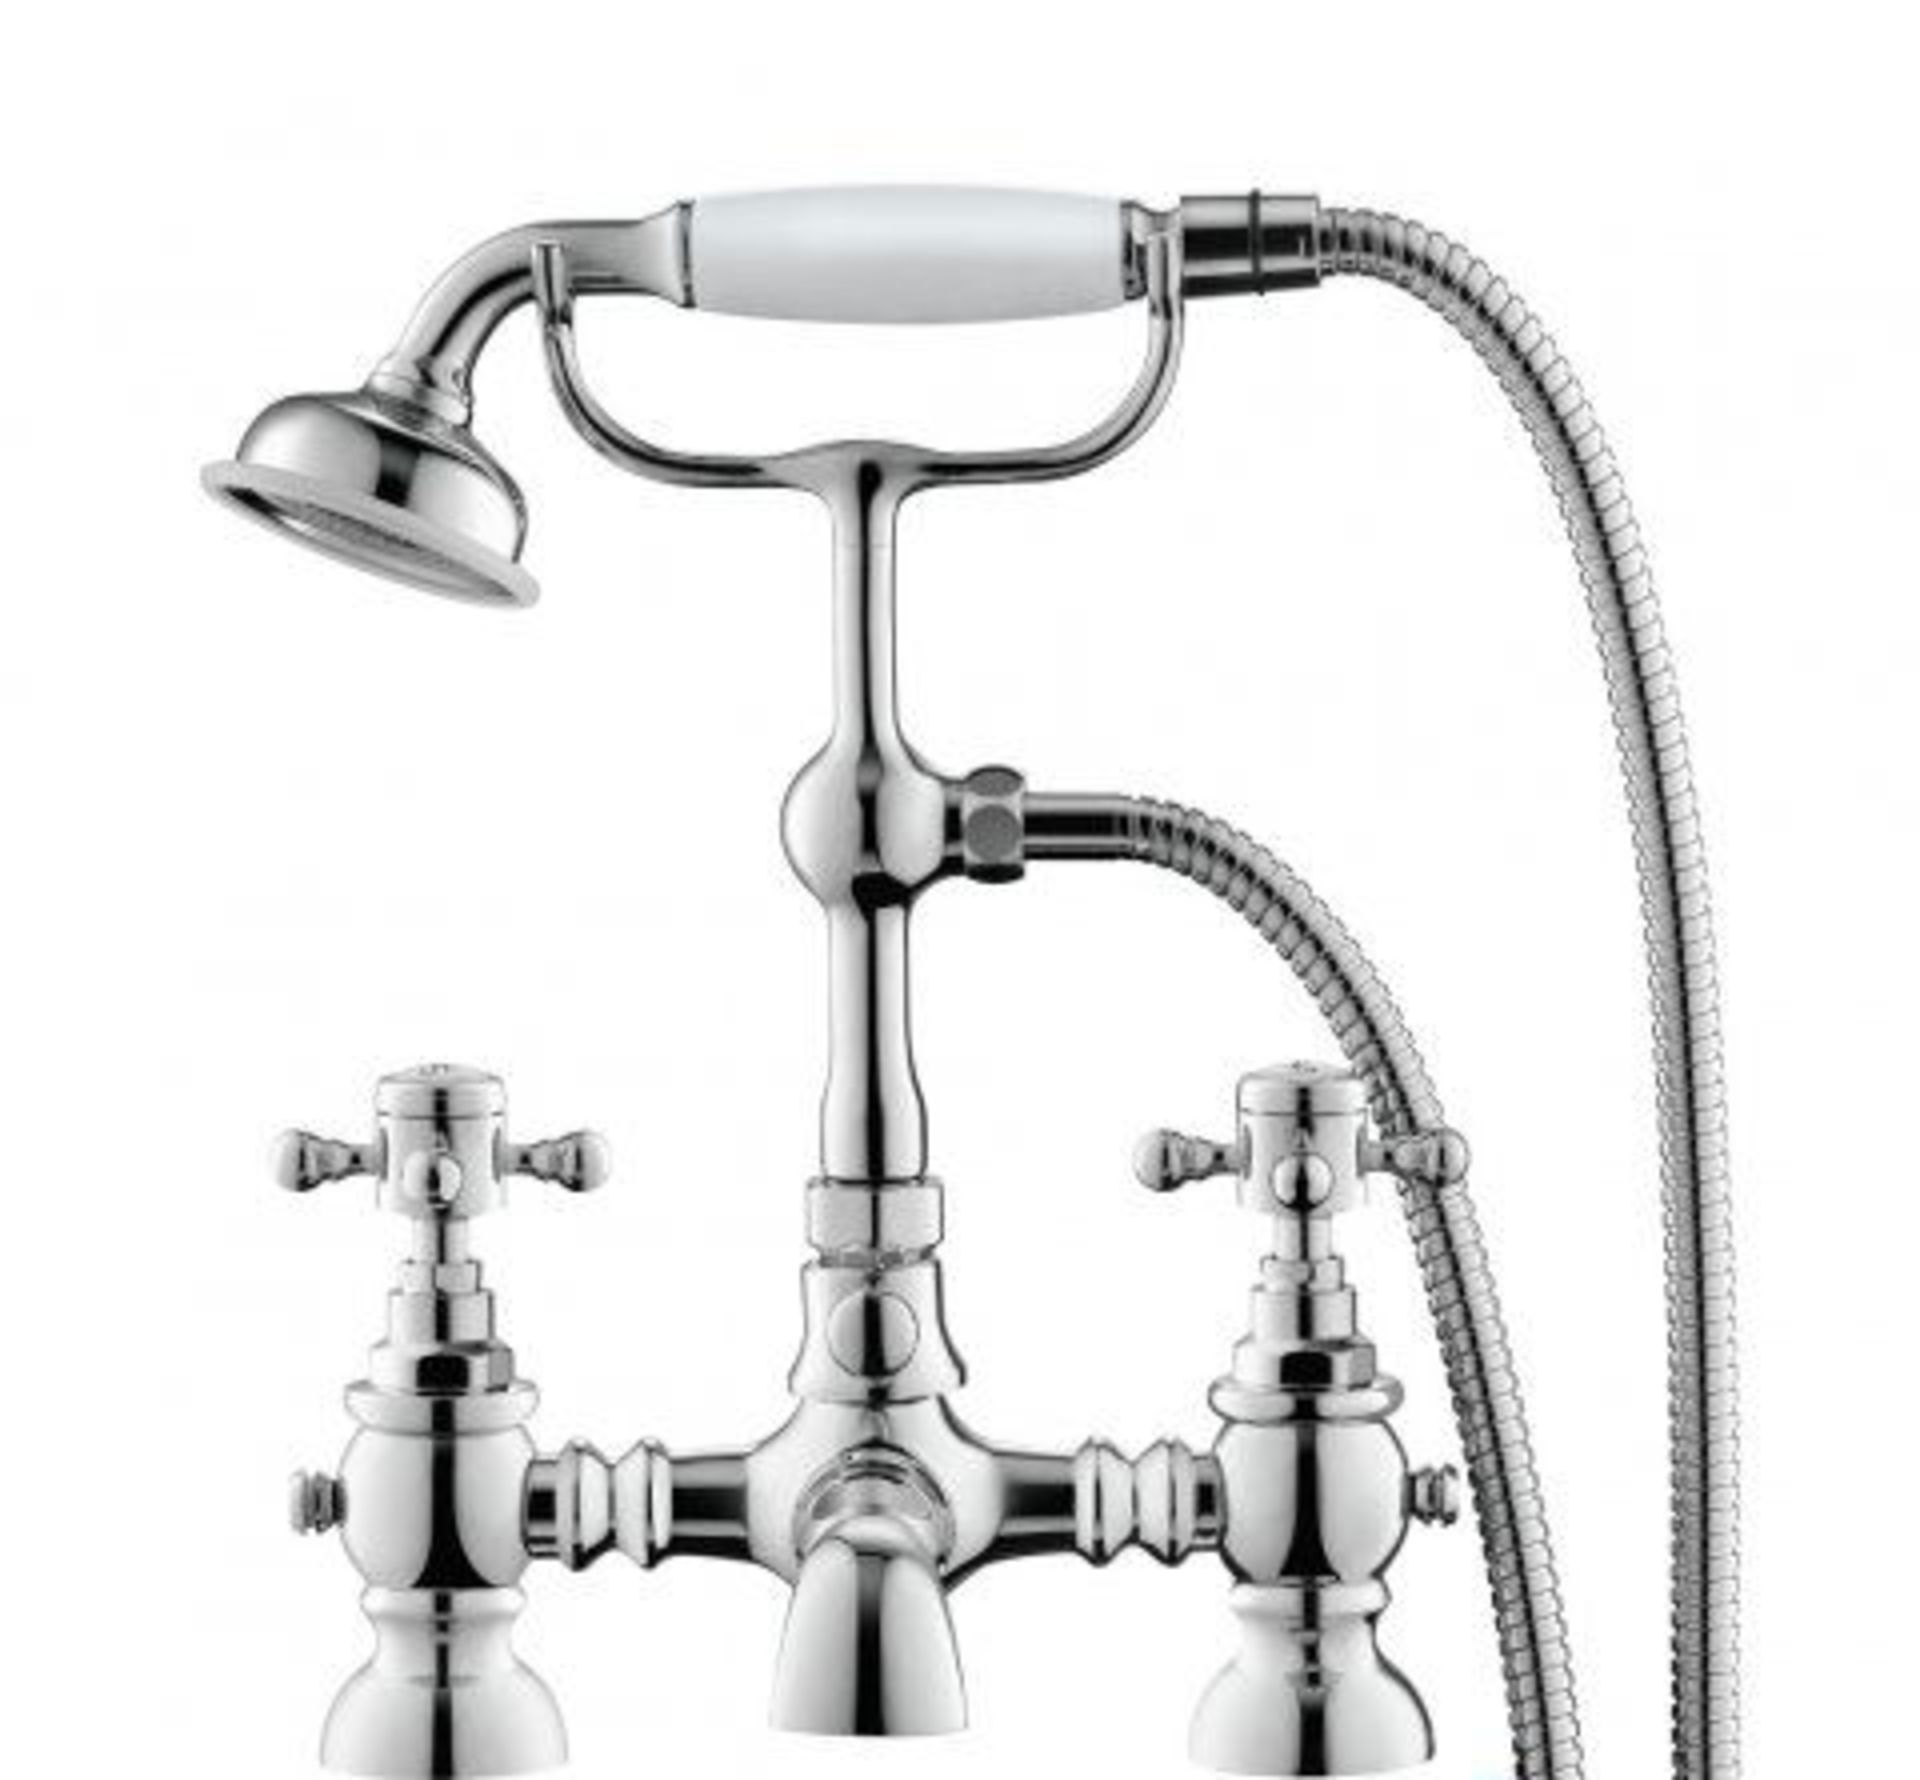 New & Boxed Victoria II Bath Shower Mixer - Traditional Tap With Hand Held. Tb35.Chrome Plate - Image 2 of 2